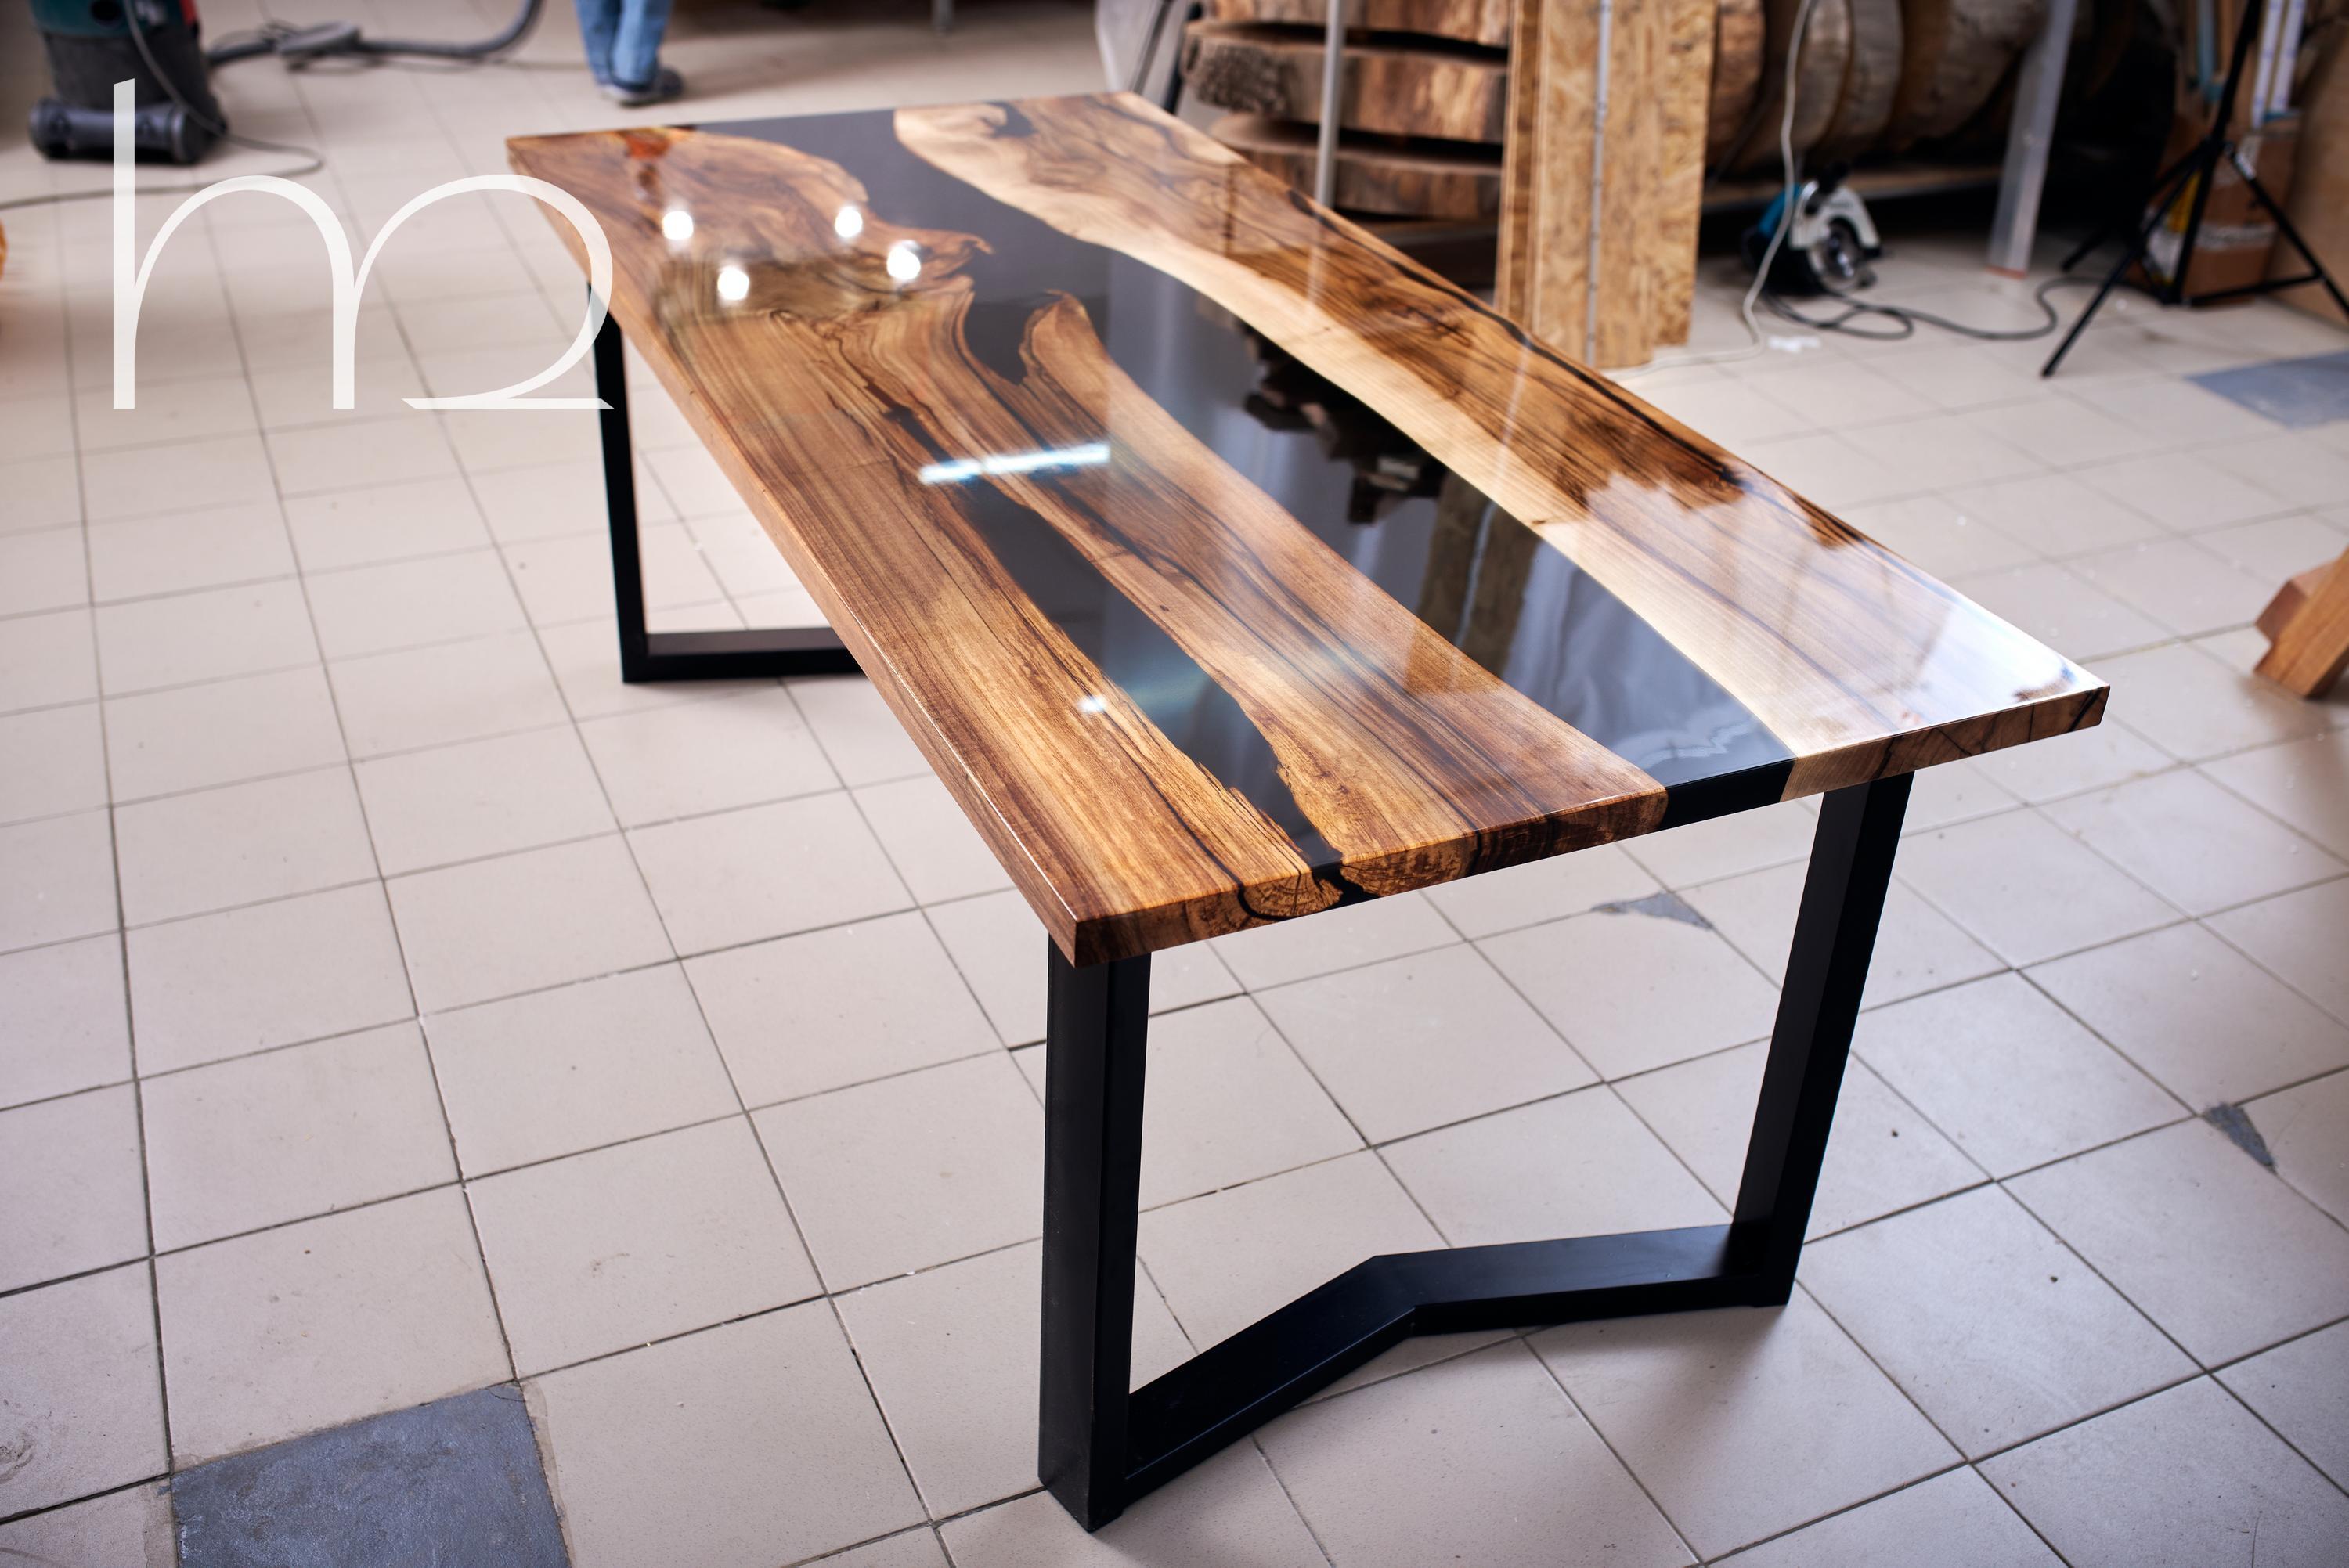 Ancient slabs of rotten walnut shrouded in the darkness of black epoxy. Every crack and every authentic feature of the old wood is accentuated with pitch black as darkness itself. The table turned out with its own special character. I am sure that